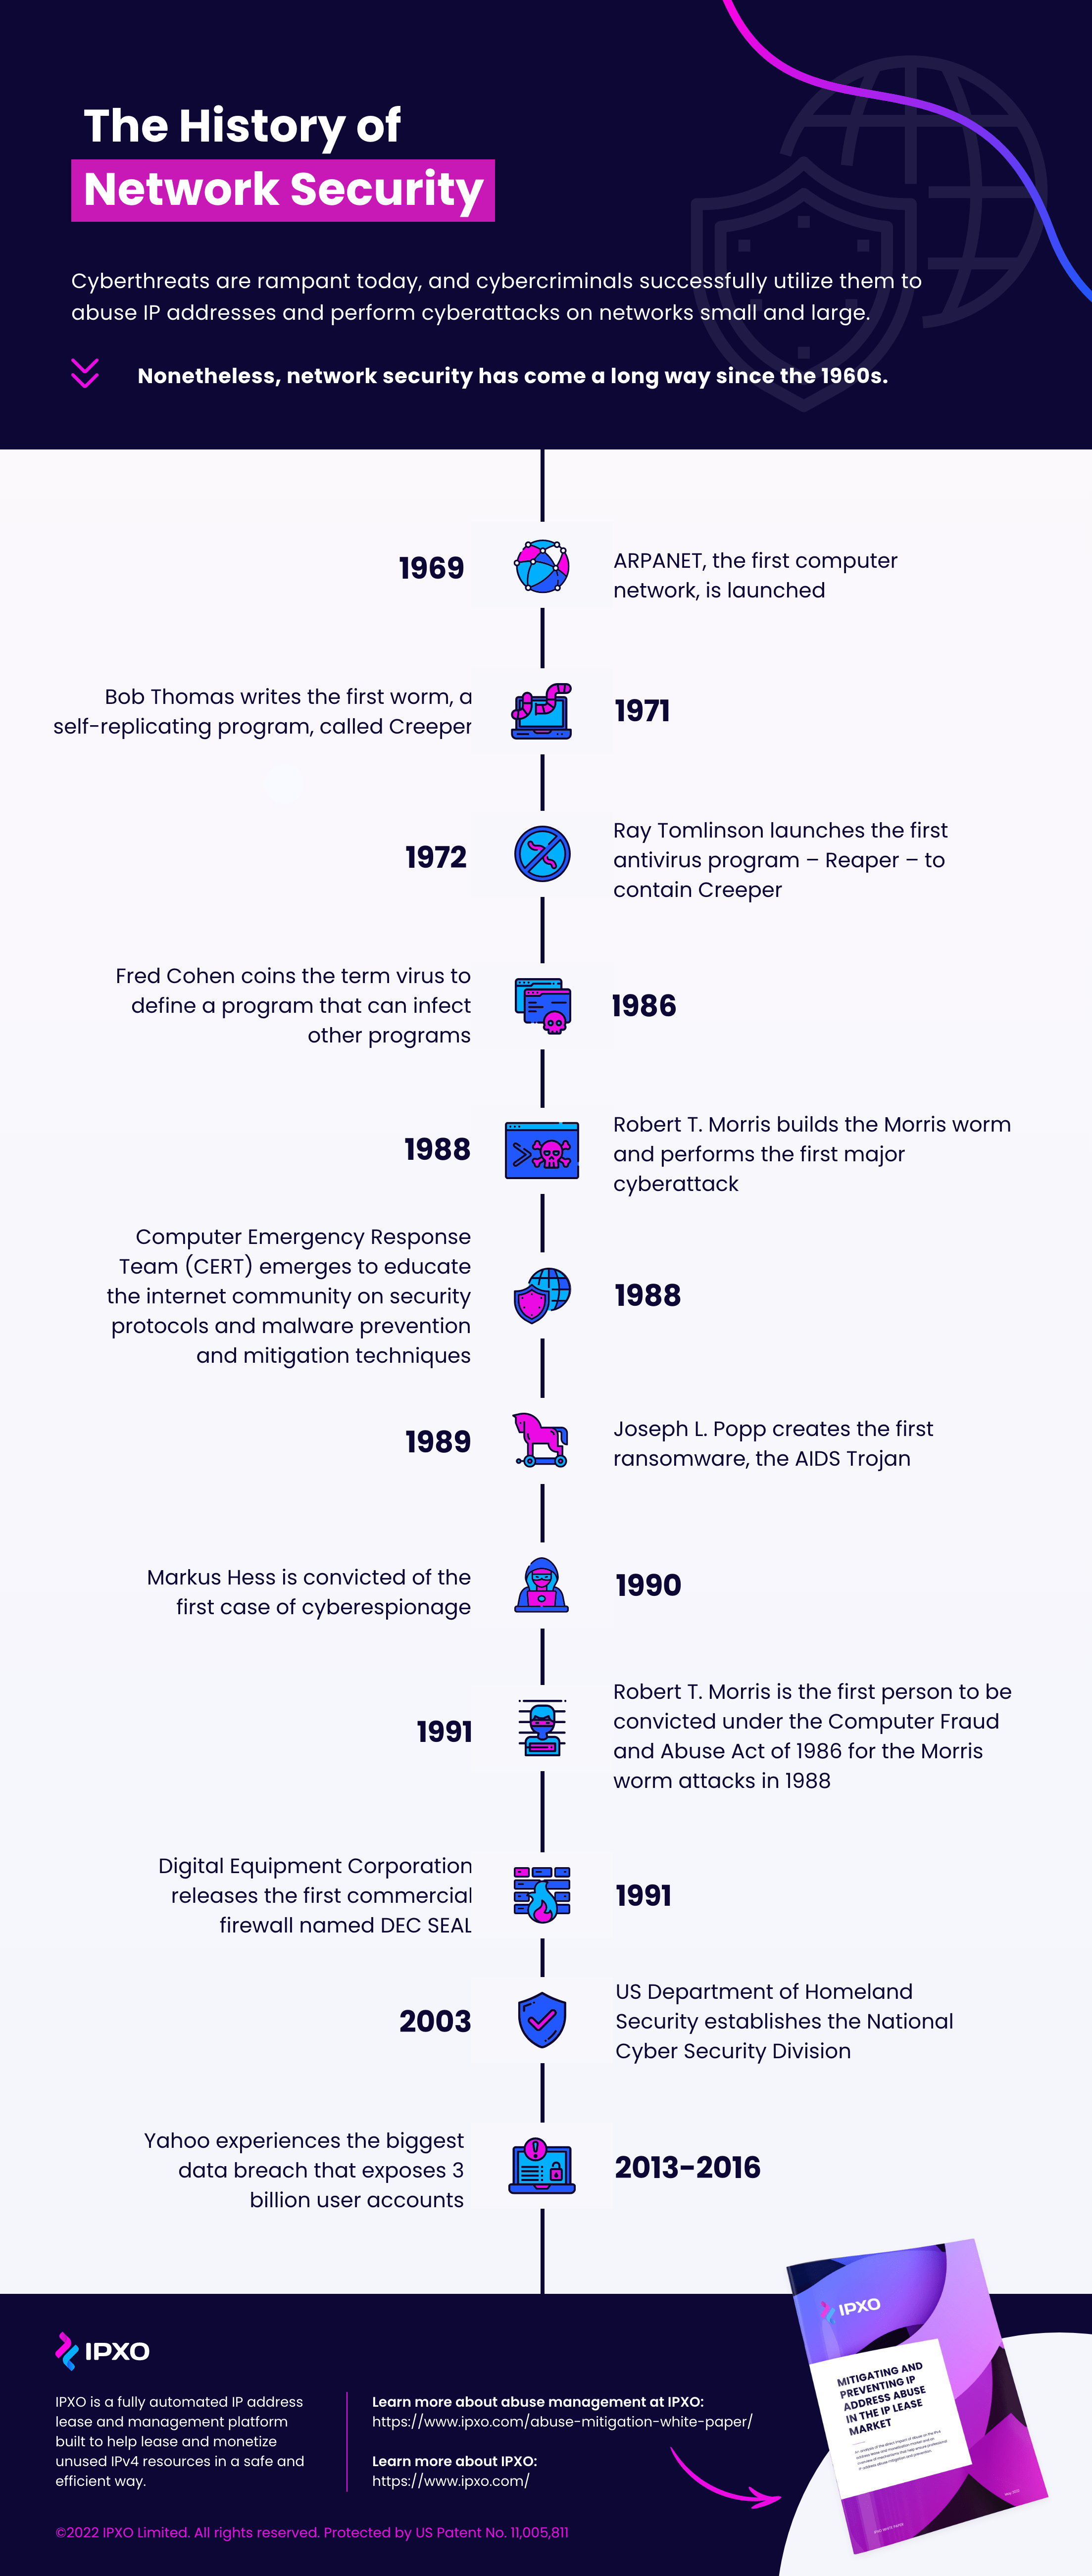 Timeline of most important dates in network security history.